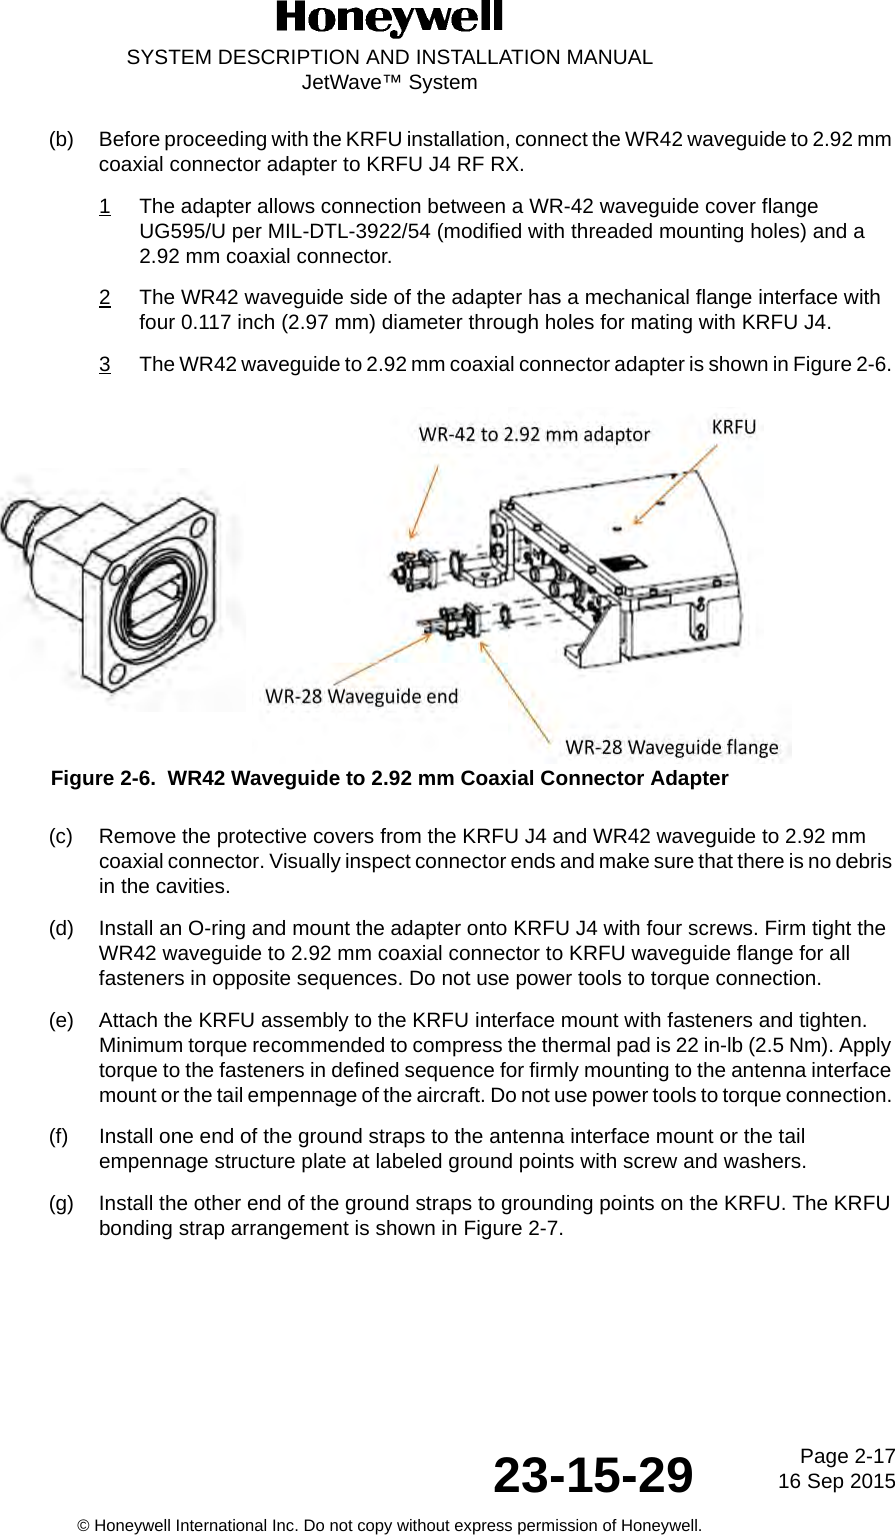 Page 2-17 16 Sep 201523-15-29SYSTEM DESCRIPTION AND INSTALLATION MANUALJetWave™ System© Honeywell International Inc. Do not copy without express permission of Honeywell.(b) Before proceeding with the KRFU installation, connect the WR42 waveguide to 2.92 mm coaxial connector adapter to KRFU J4 RF RX. 1The adapter allows connection between a WR-42 waveguide cover flange UG595/U per MIL-DTL-3922/54 (modified with threaded mounting holes) and a 2.92 mm coaxial connector. 2The WR42 waveguide side of the adapter has a mechanical flange interface with four 0.117 inch (2.97 mm) diameter through holes for mating with KRFU J4. 3The WR42 waveguide to 2.92 mm coaxial connector adapter is shown in Figure 2-6. Figure 2-6.  WR42 Waveguide to 2.92 mm Coaxial Connector Adapter(c) Remove the protective covers from the KRFU J4 and WR42 waveguide to 2.92 mm coaxial connector. Visually inspect connector ends and make sure that there is no debris in the cavities. (d) Install an O-ring and mount the adapter onto KRFU J4 with four screws. Firm tight the WR42 waveguide to 2.92 mm coaxial connector to KRFU waveguide flange for all fasteners in opposite sequences. Do not use power tools to torque connection. (e) Attach the KRFU assembly to the KRFU interface mount with fasteners and tighten. Minimum torque recommended to compress the thermal pad is 22 in-lb (2.5 Nm). Apply torque to the fasteners in defined sequence for firmly mounting to the antenna interface mount or the tail empennage of the aircraft. Do not use power tools to torque connection. (f) Install one end of the ground straps to the antenna interface mount or the tail empennage structure plate at labeled ground points with screw and washers. (g) Install the other end of the ground straps to grounding points on the KRFU. The KRFU bonding strap arrangement is shown in Figure 2-7. 